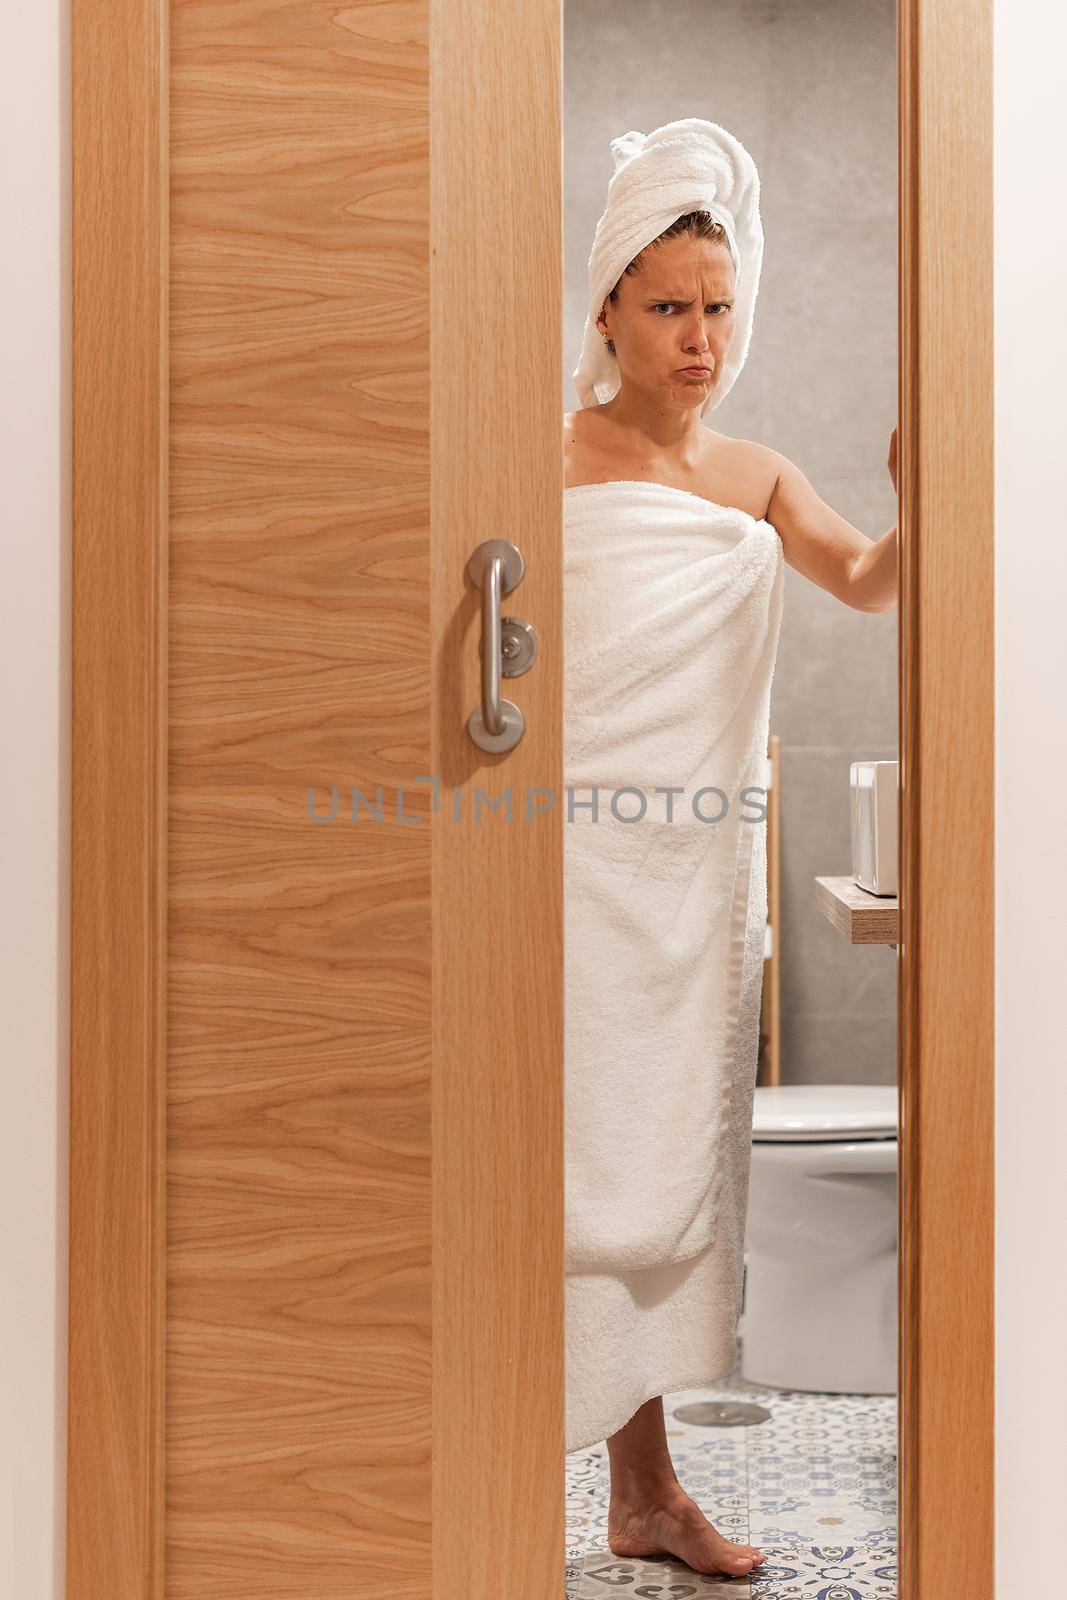 Adult woman wrapped with towels annoyed at being spied on closes bathroom door. Concept of hotel.